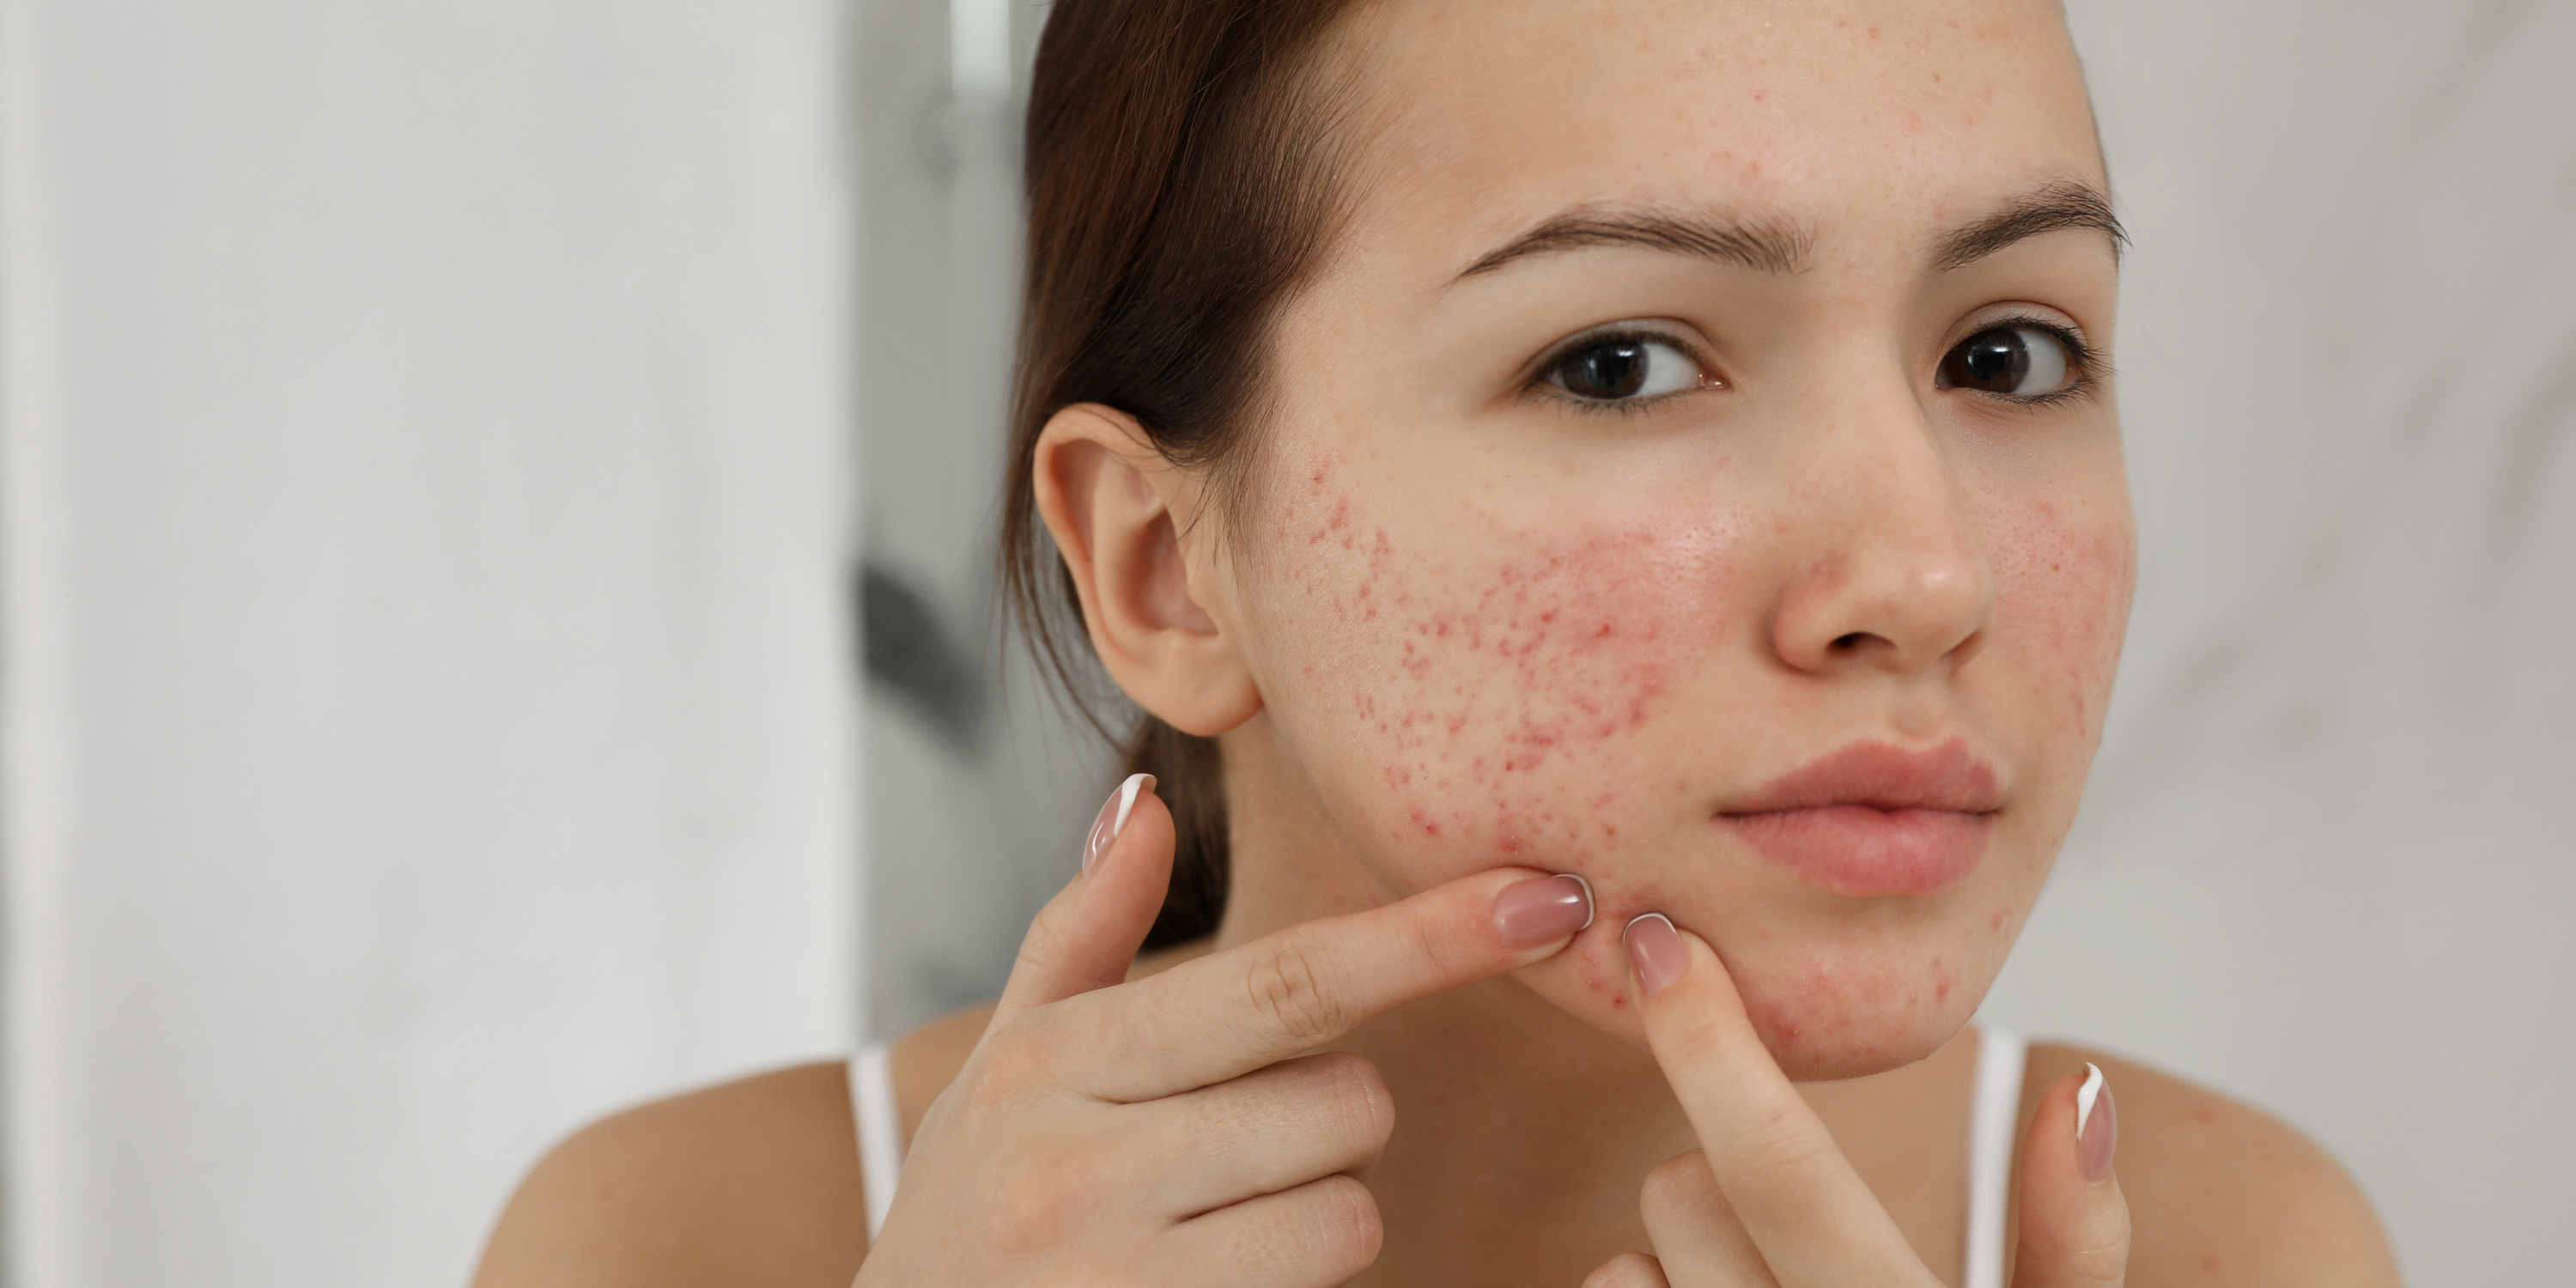 What Are The Best Products for Acne-Prone Skin?